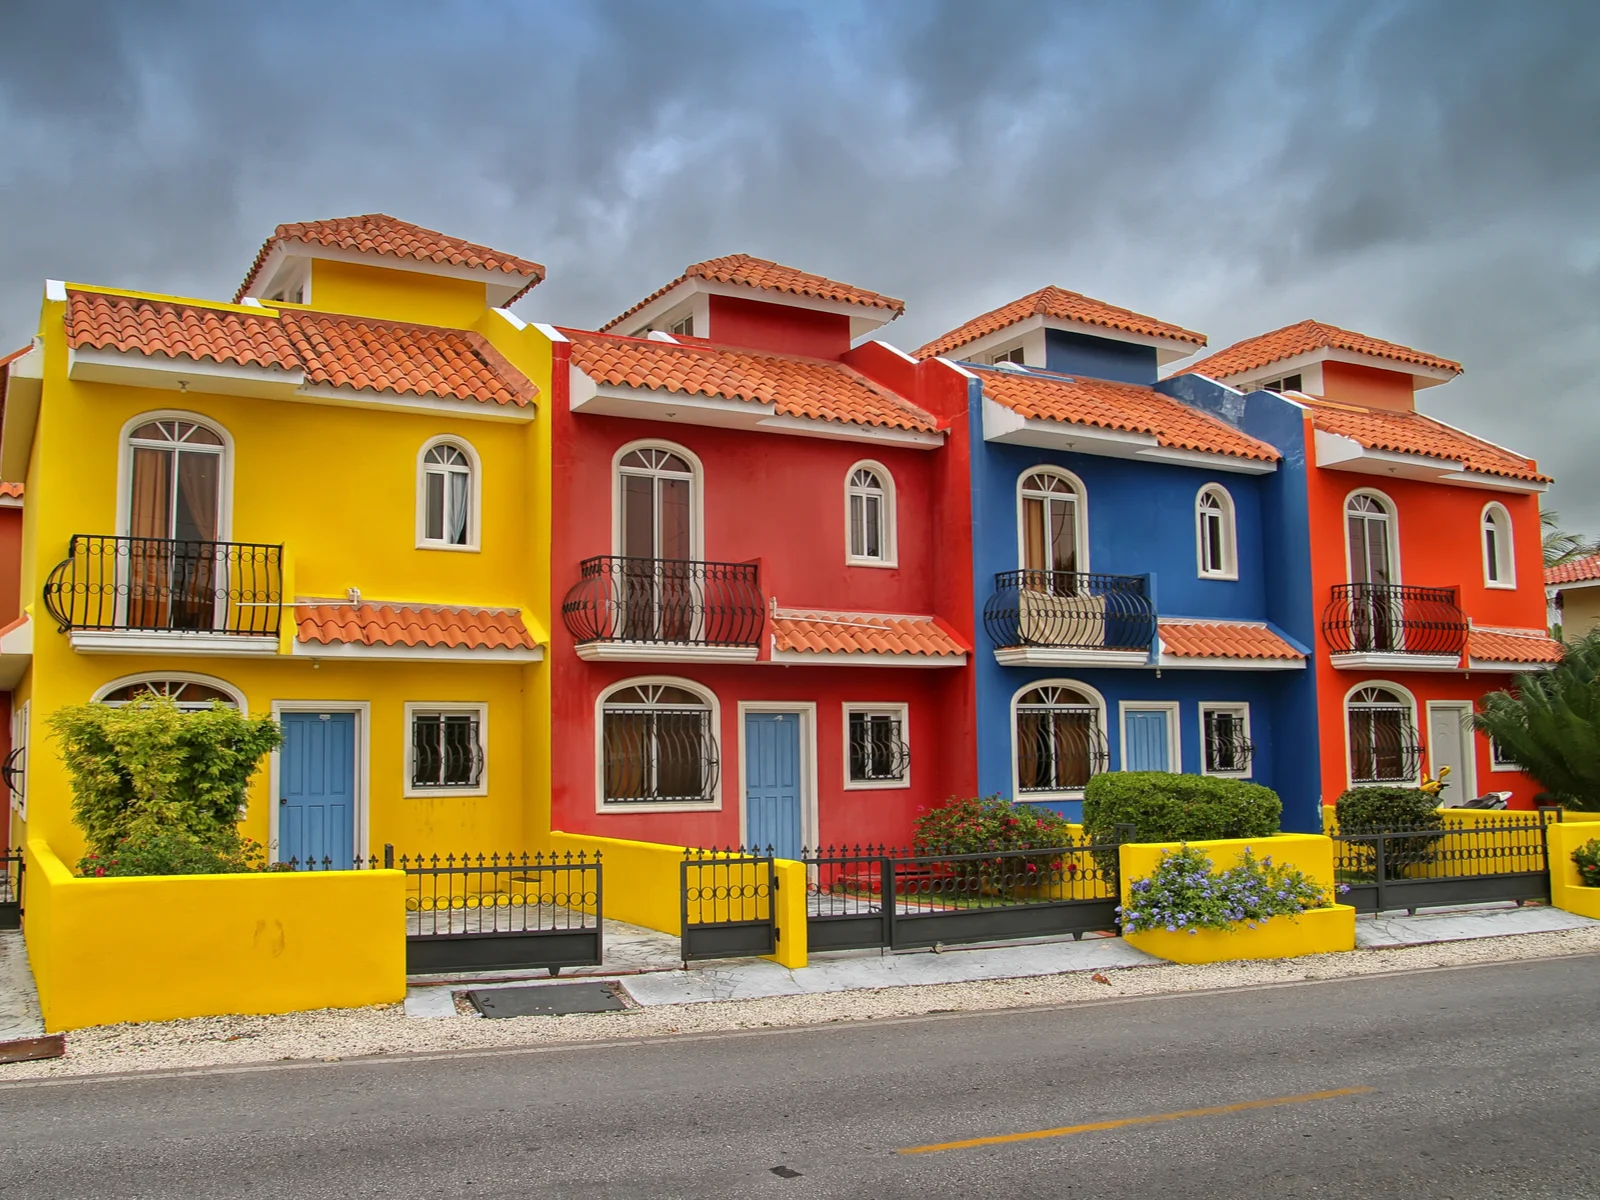 Multi-colored homes pictured against a cloudy sky during the worst time to visit Punta Cana